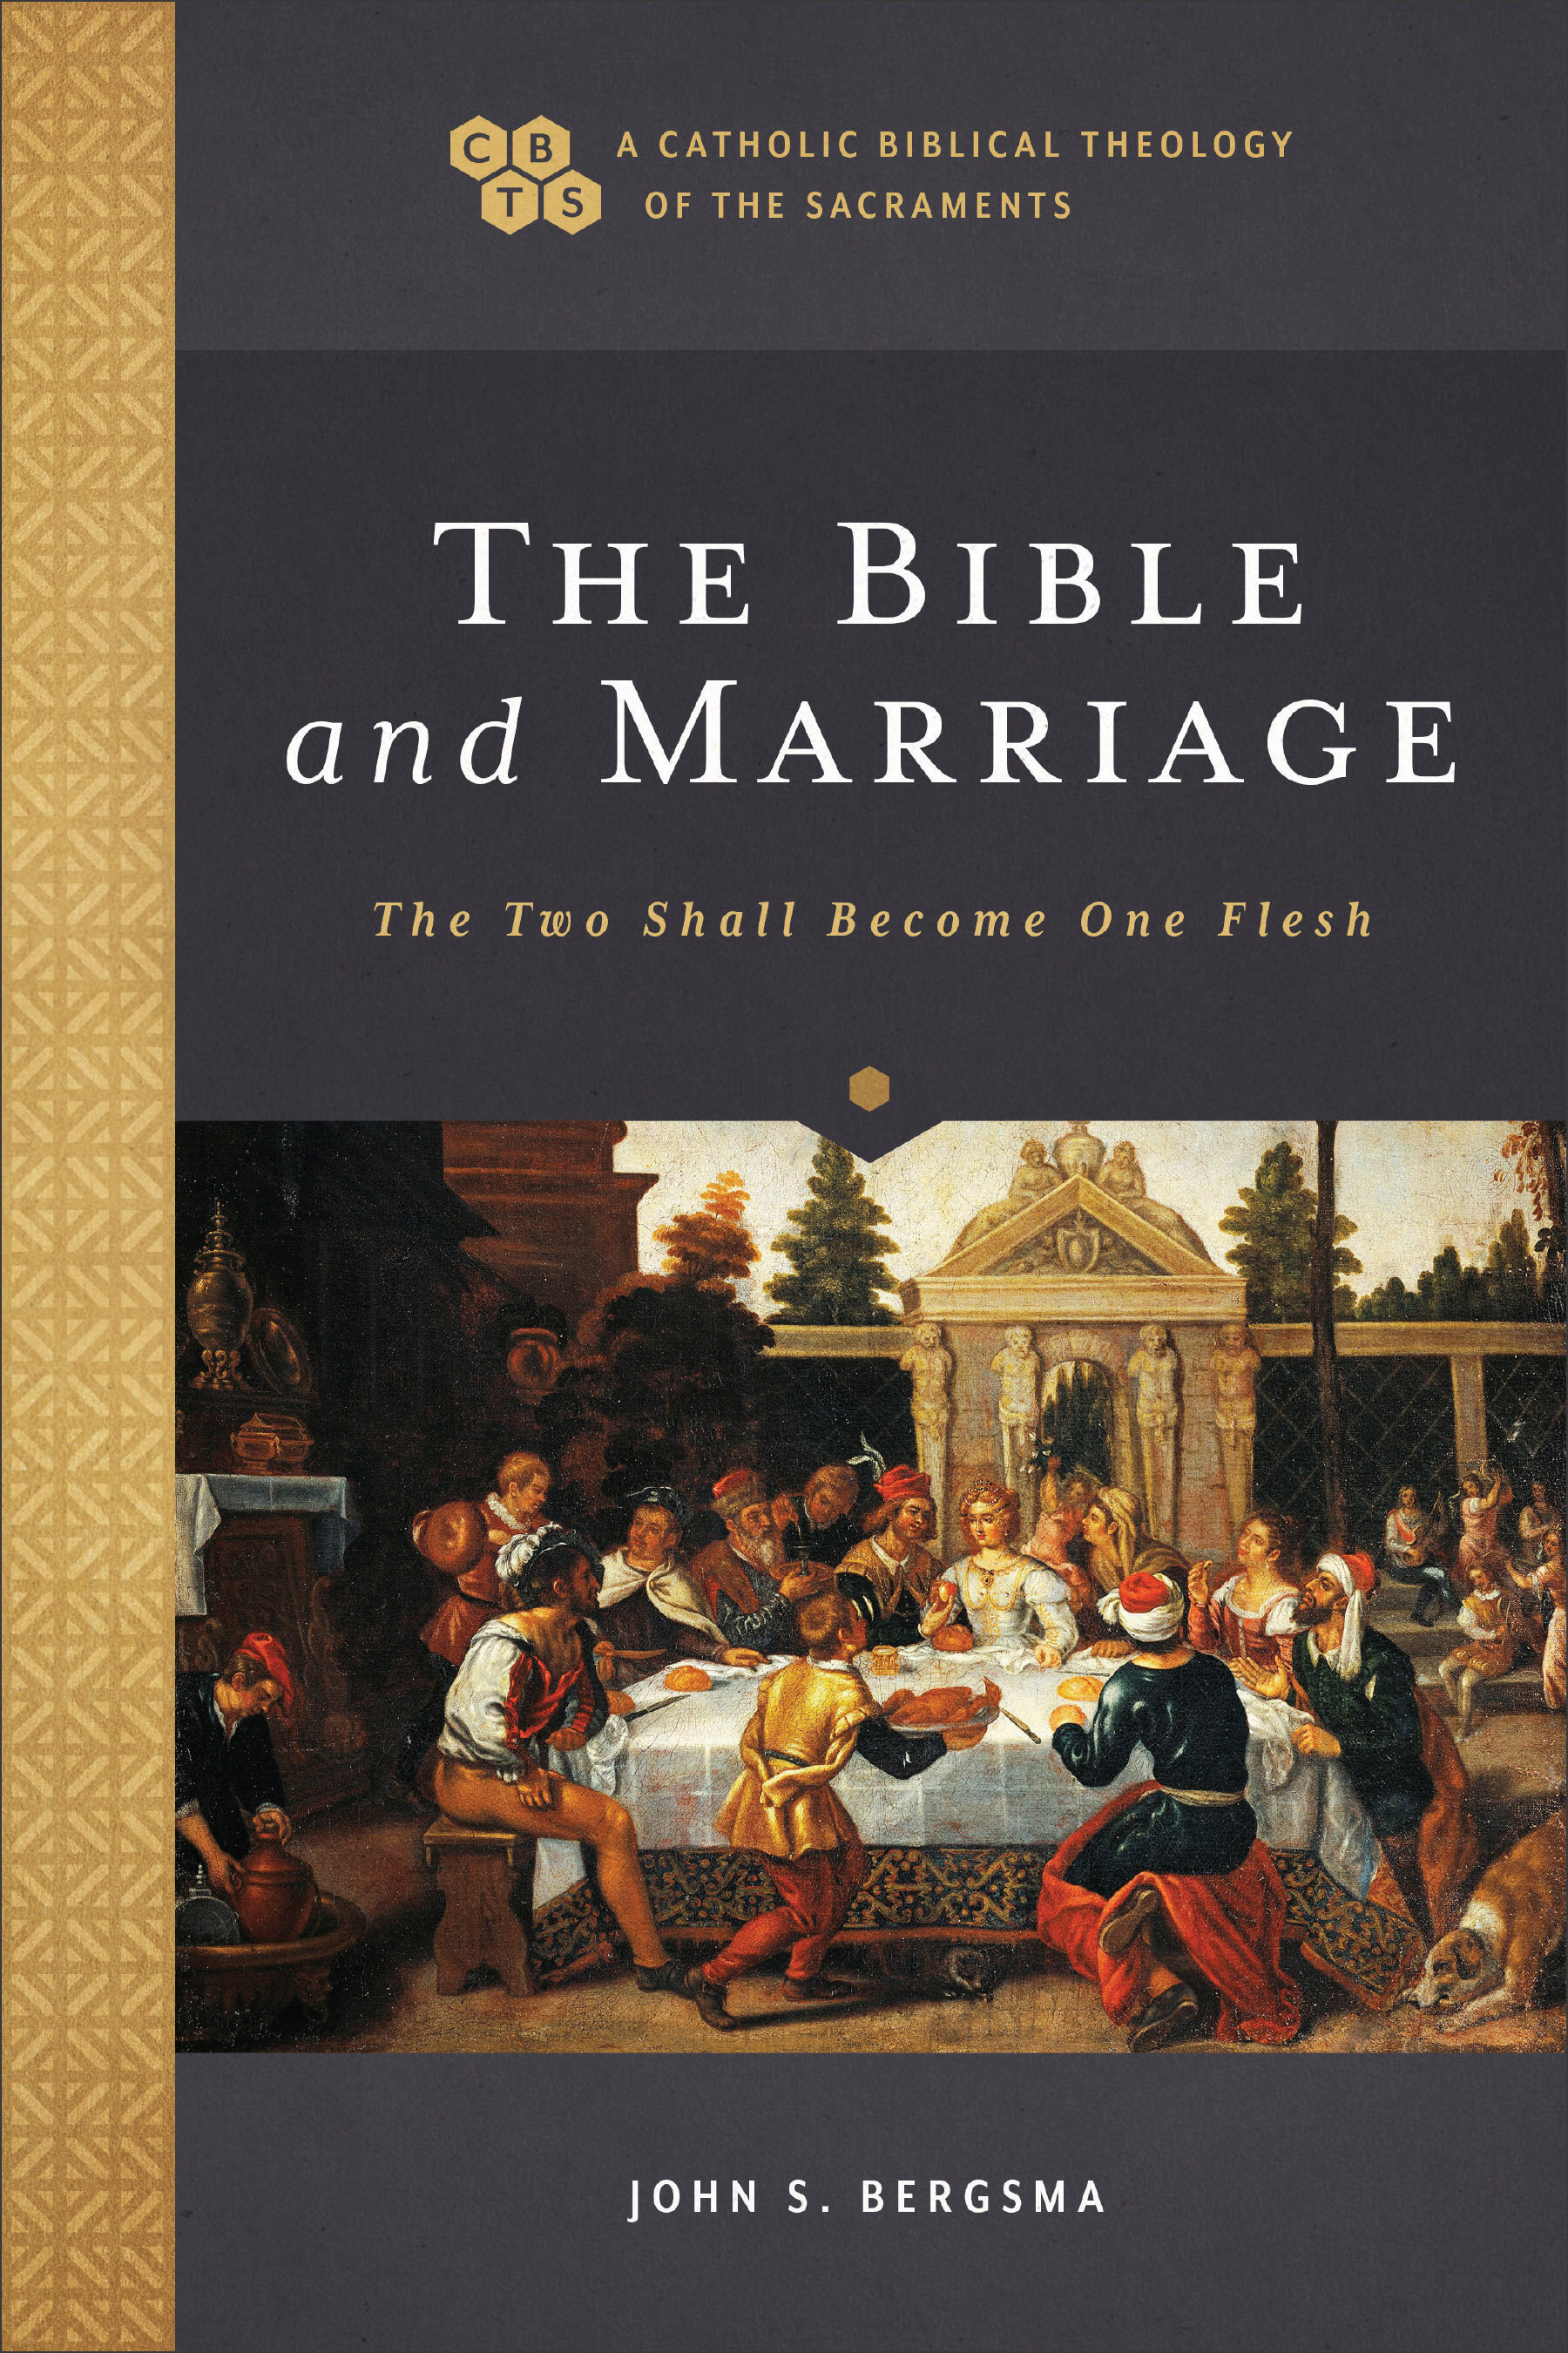 The Bible and Marriage: The Two Shall Become One Flesh (A Catholic Biblical Theology of the Sacraments)